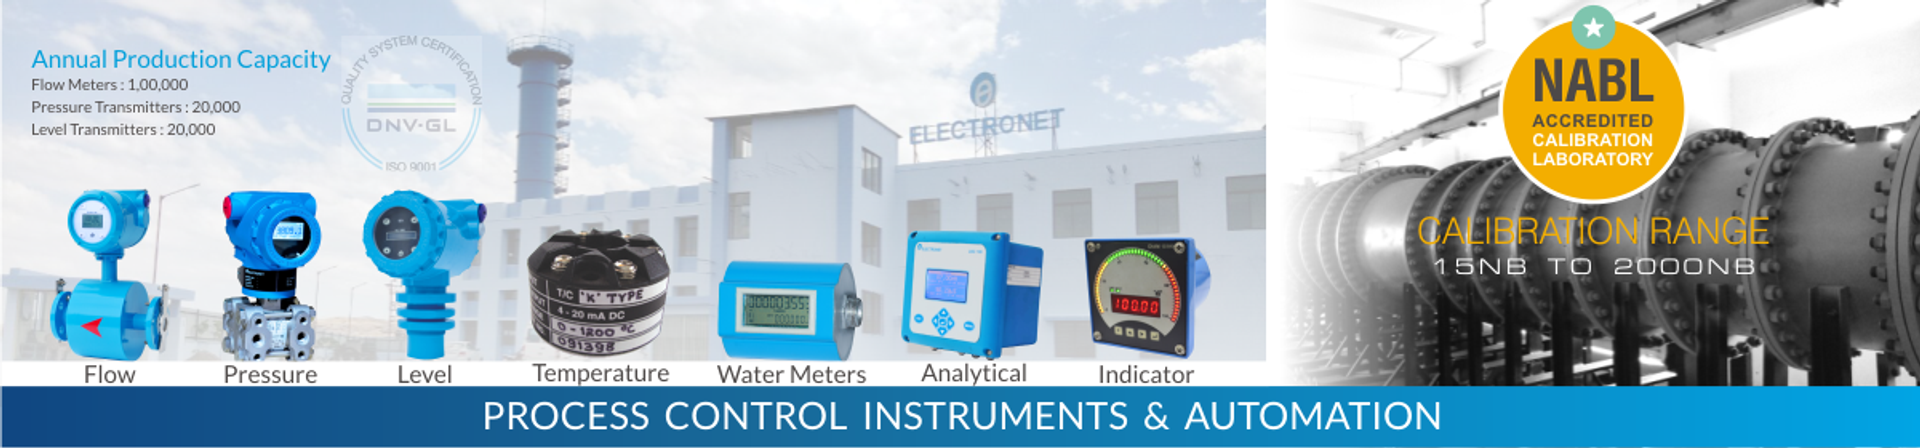 Electronet Equipments Private Limited